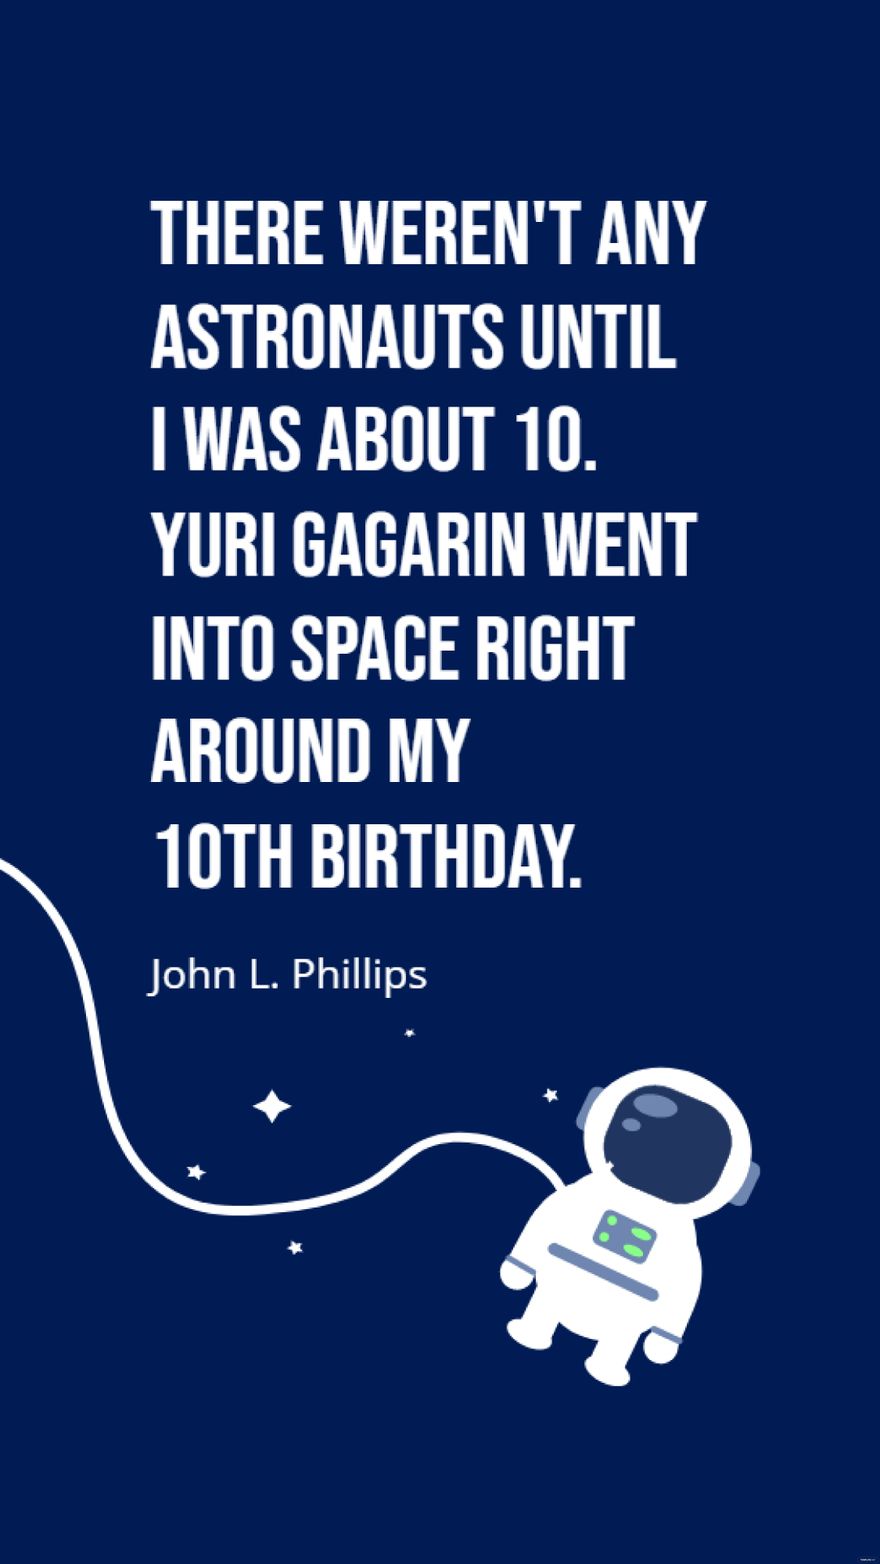 John L. Phillips - There weren't any astronauts until I was about 10. Yuri Gagarin went into space right around my 10th birthday.